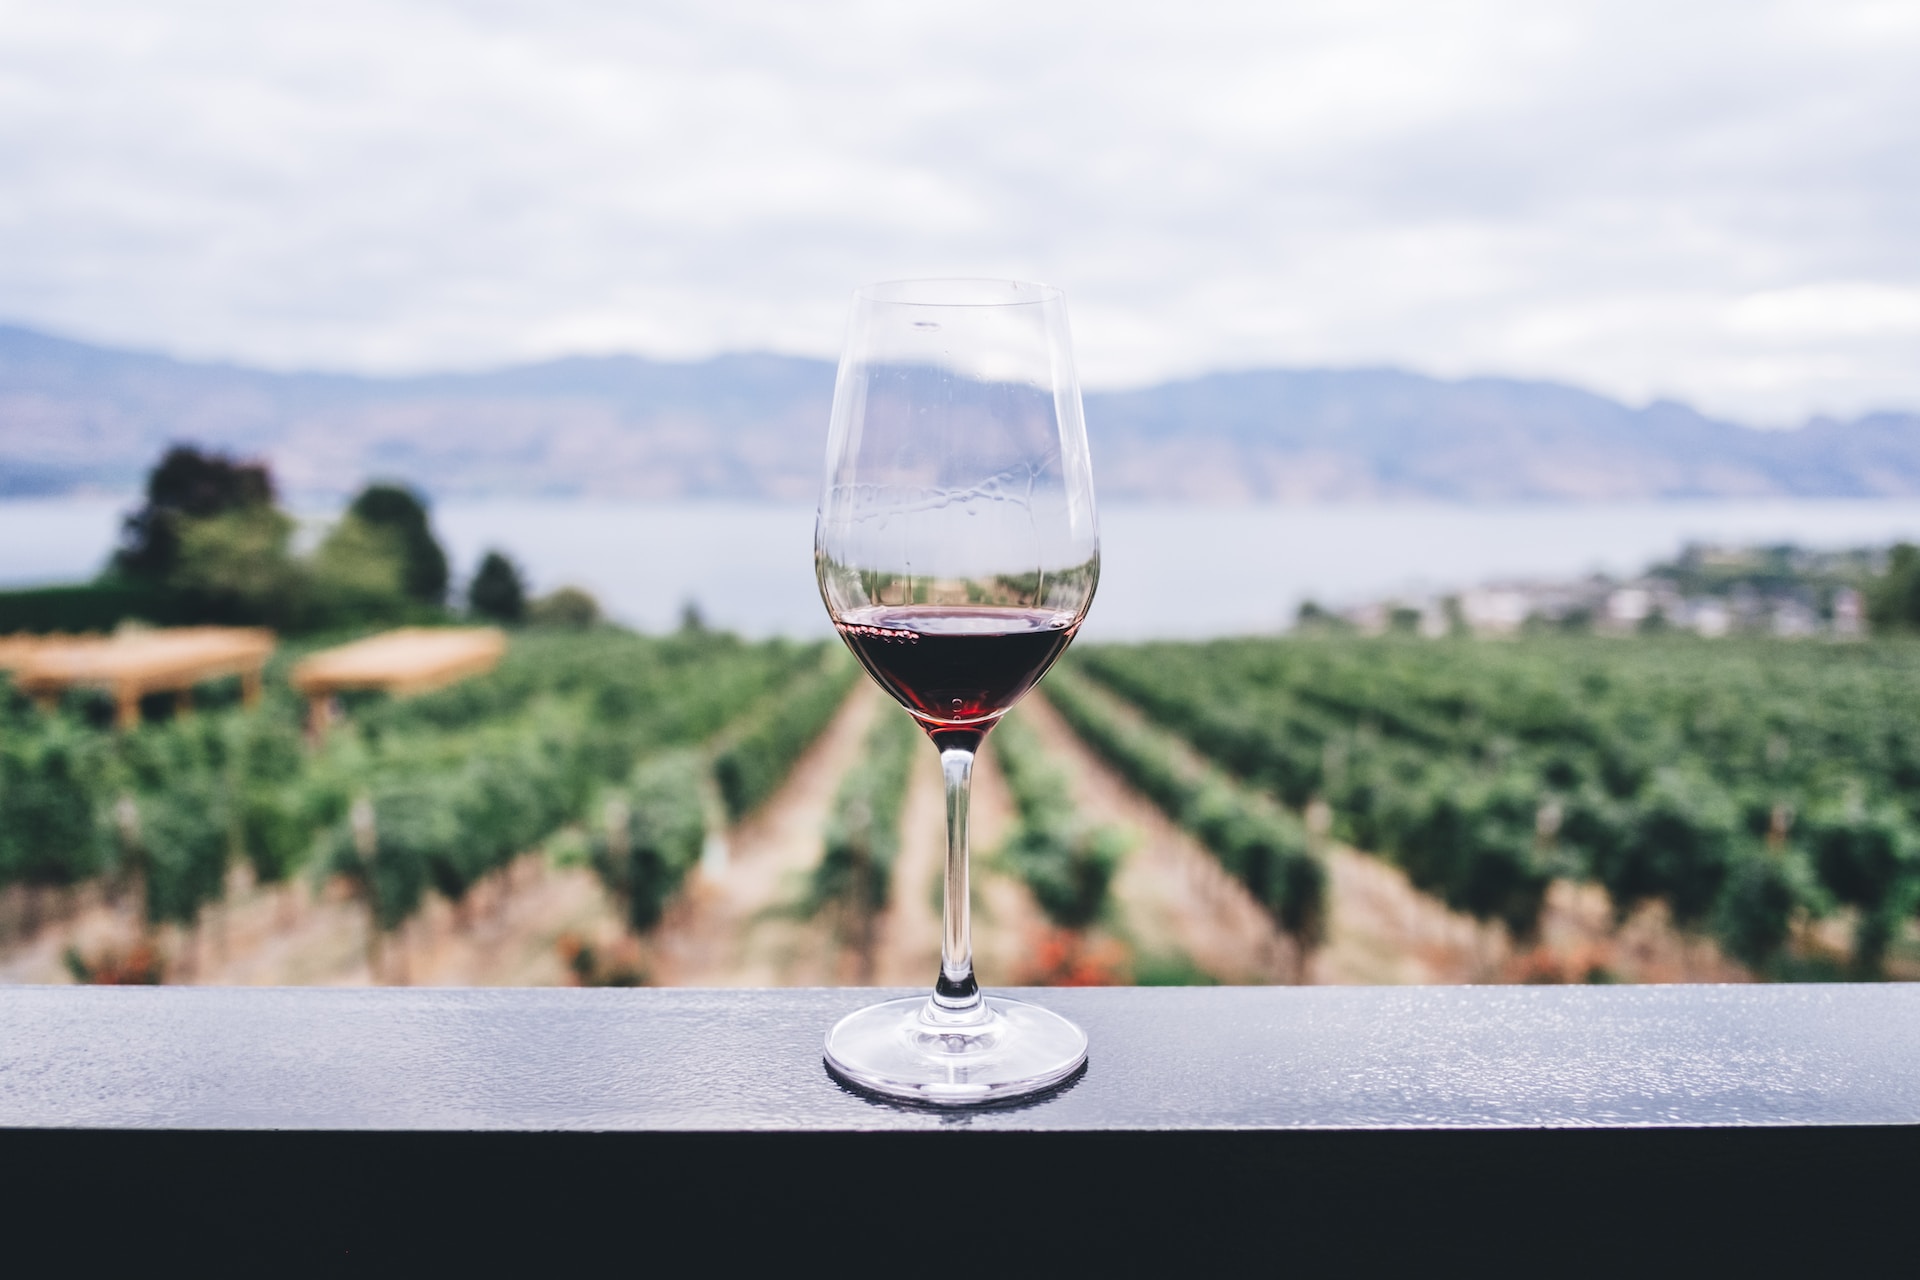 wine and vineyard - can you taste the terroir?